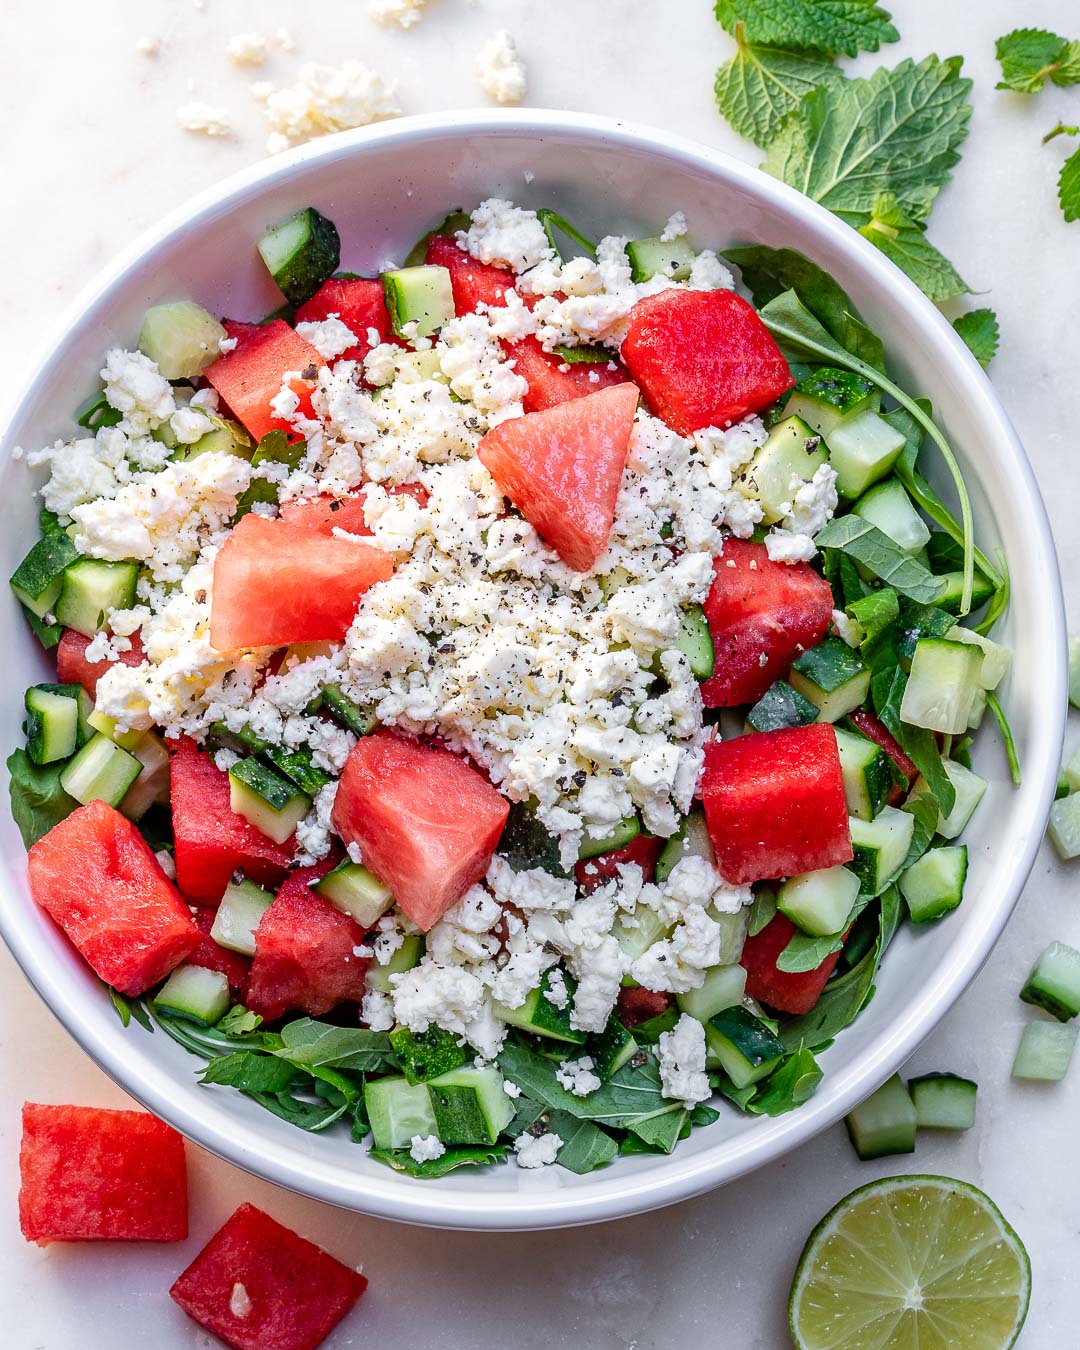 Eat Clean and Hydrate with this Watermelon + Feta Salad